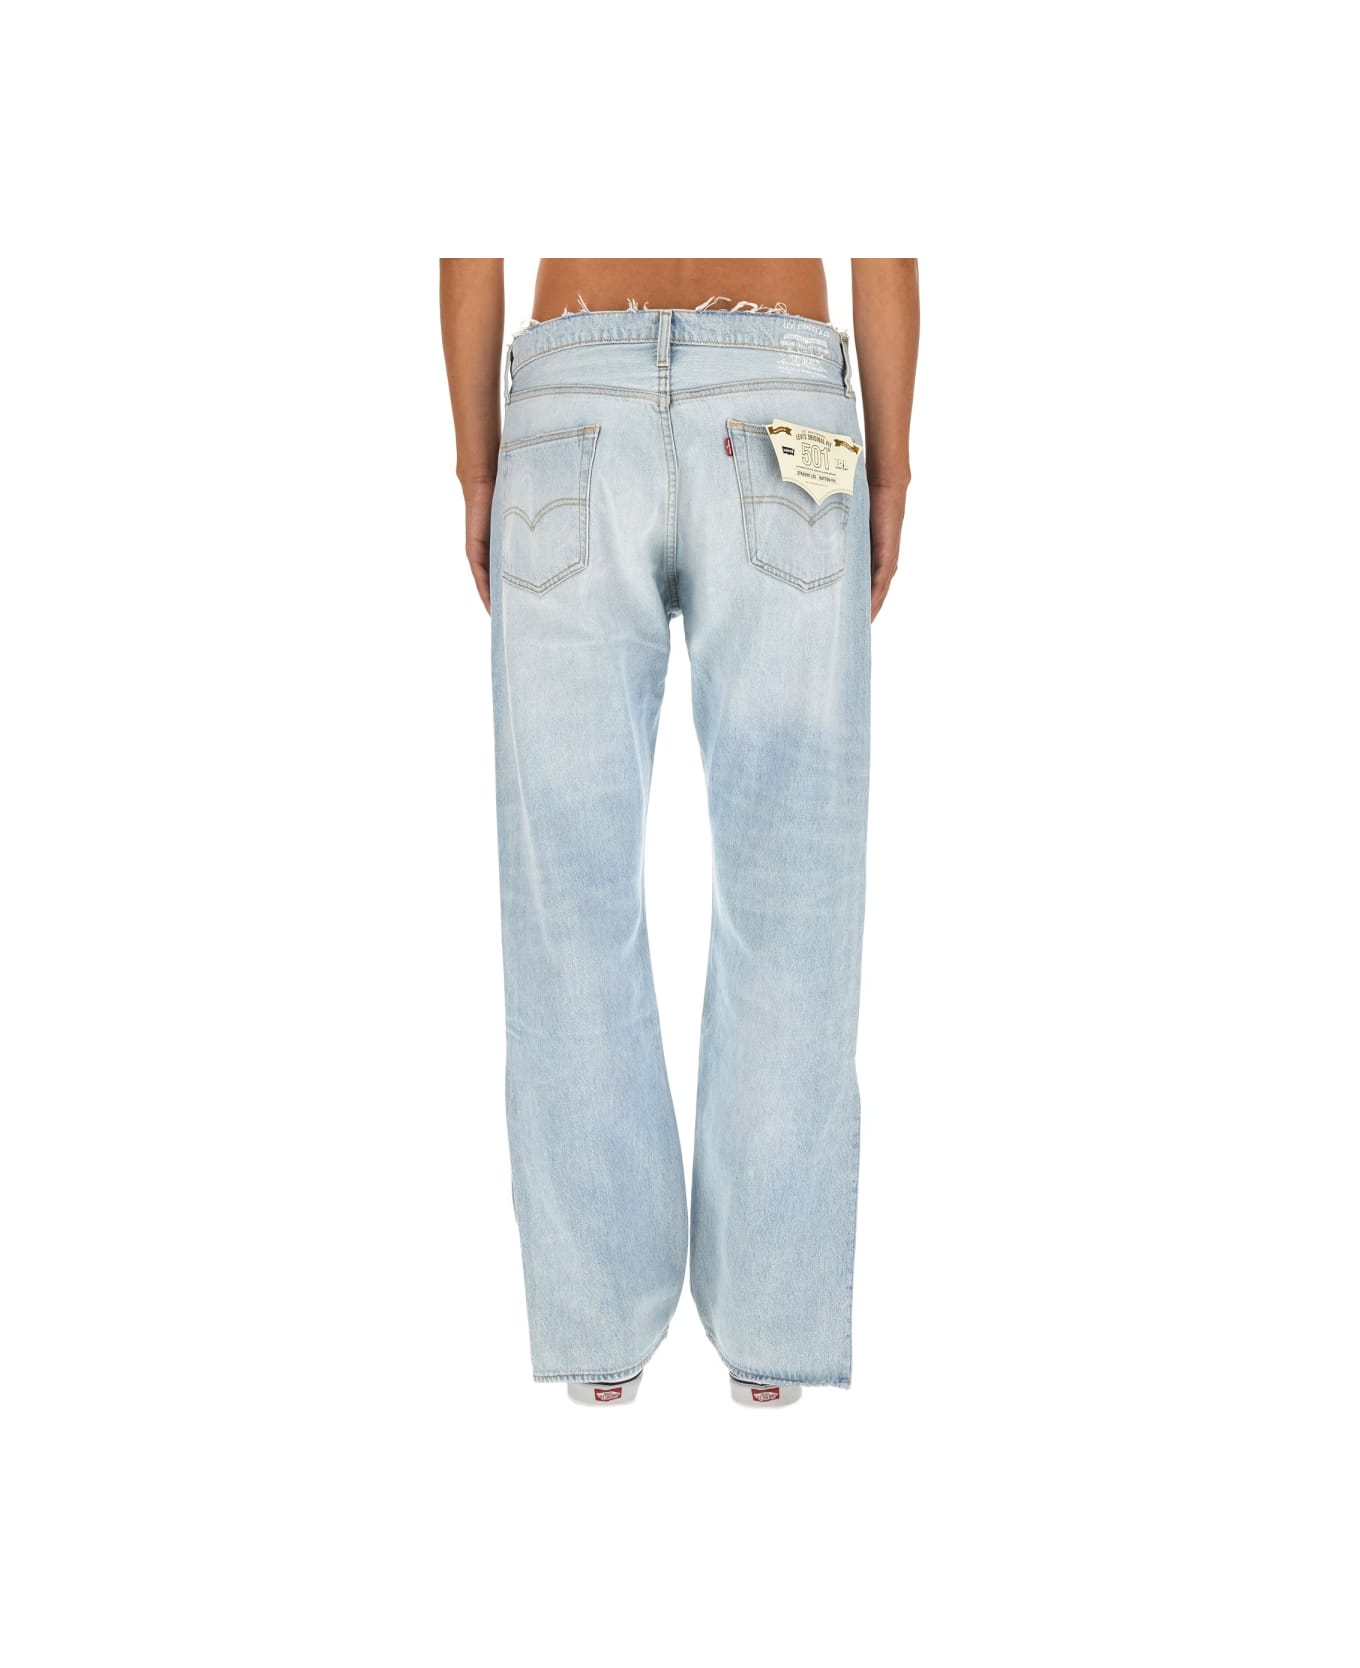 ERL Levi's® Jeans X Erl - DENIM